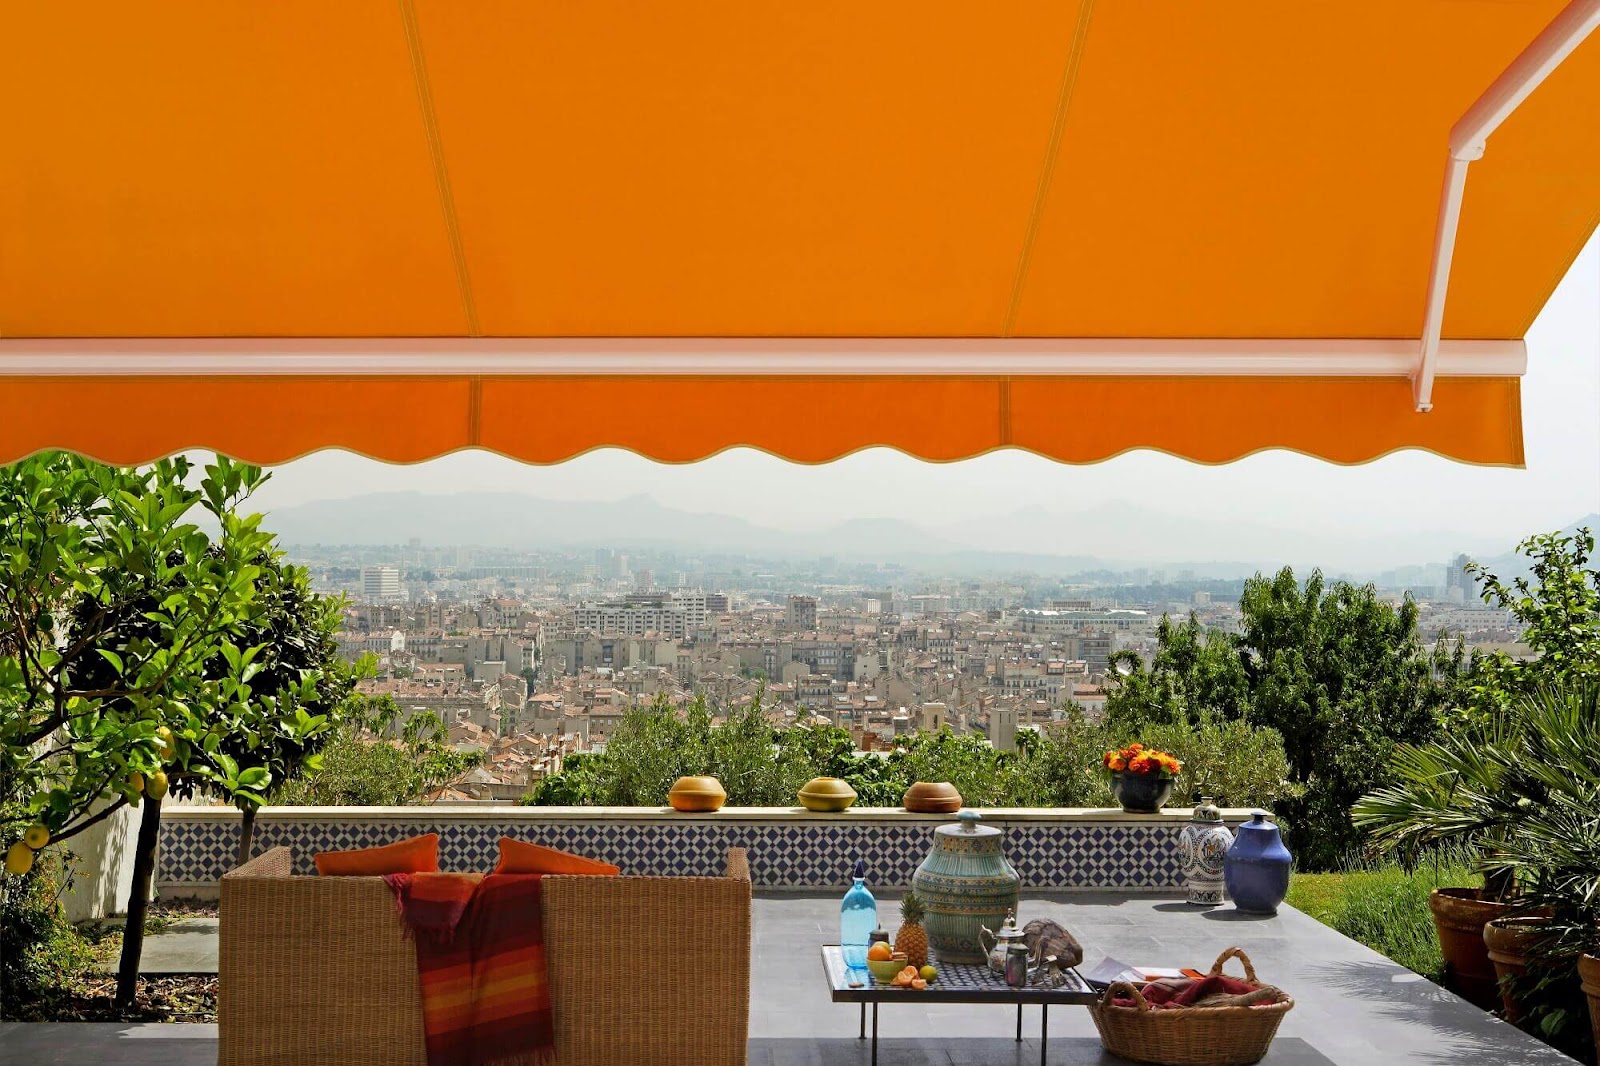 Orange collapsible retractable canopy on a patio